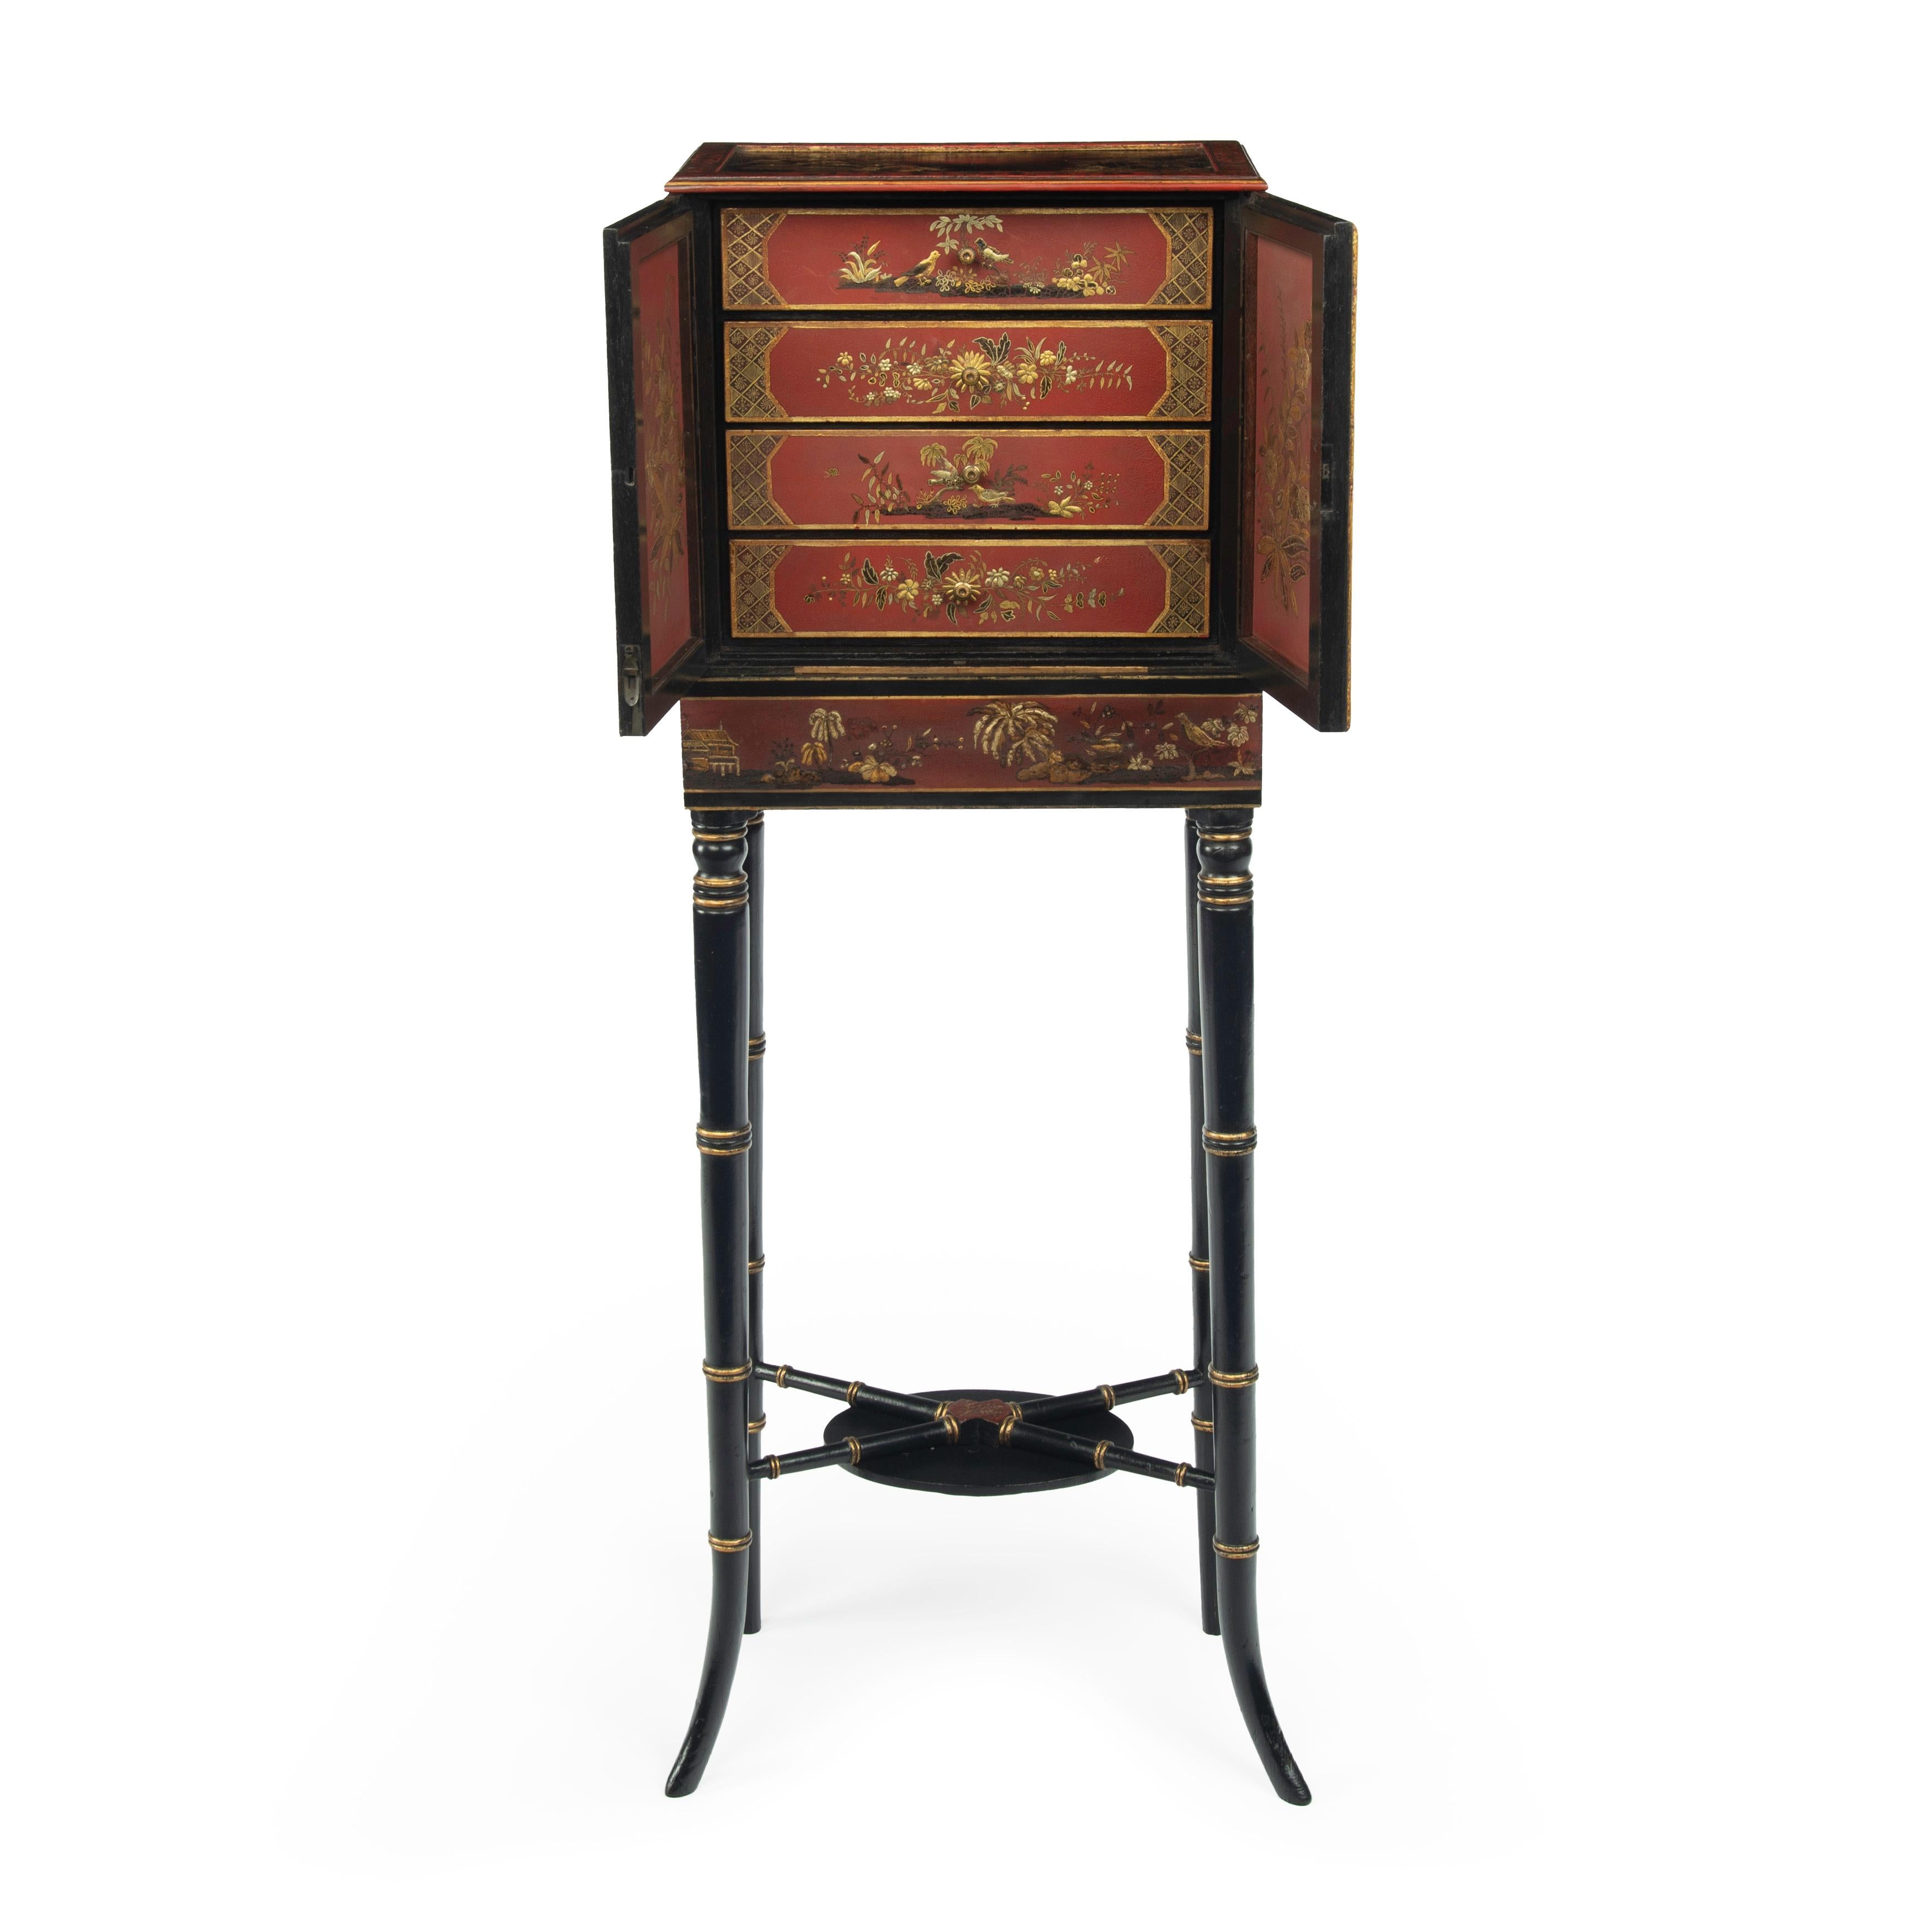 A delicate Regency Chinoiserie lacquer cabinet, of rectangular form with two doors opening to reveal four small drawers, decorated throughout in gilt, black and cinnabar lacquer, the top, doors and sides with figures in landscapes including a picnic